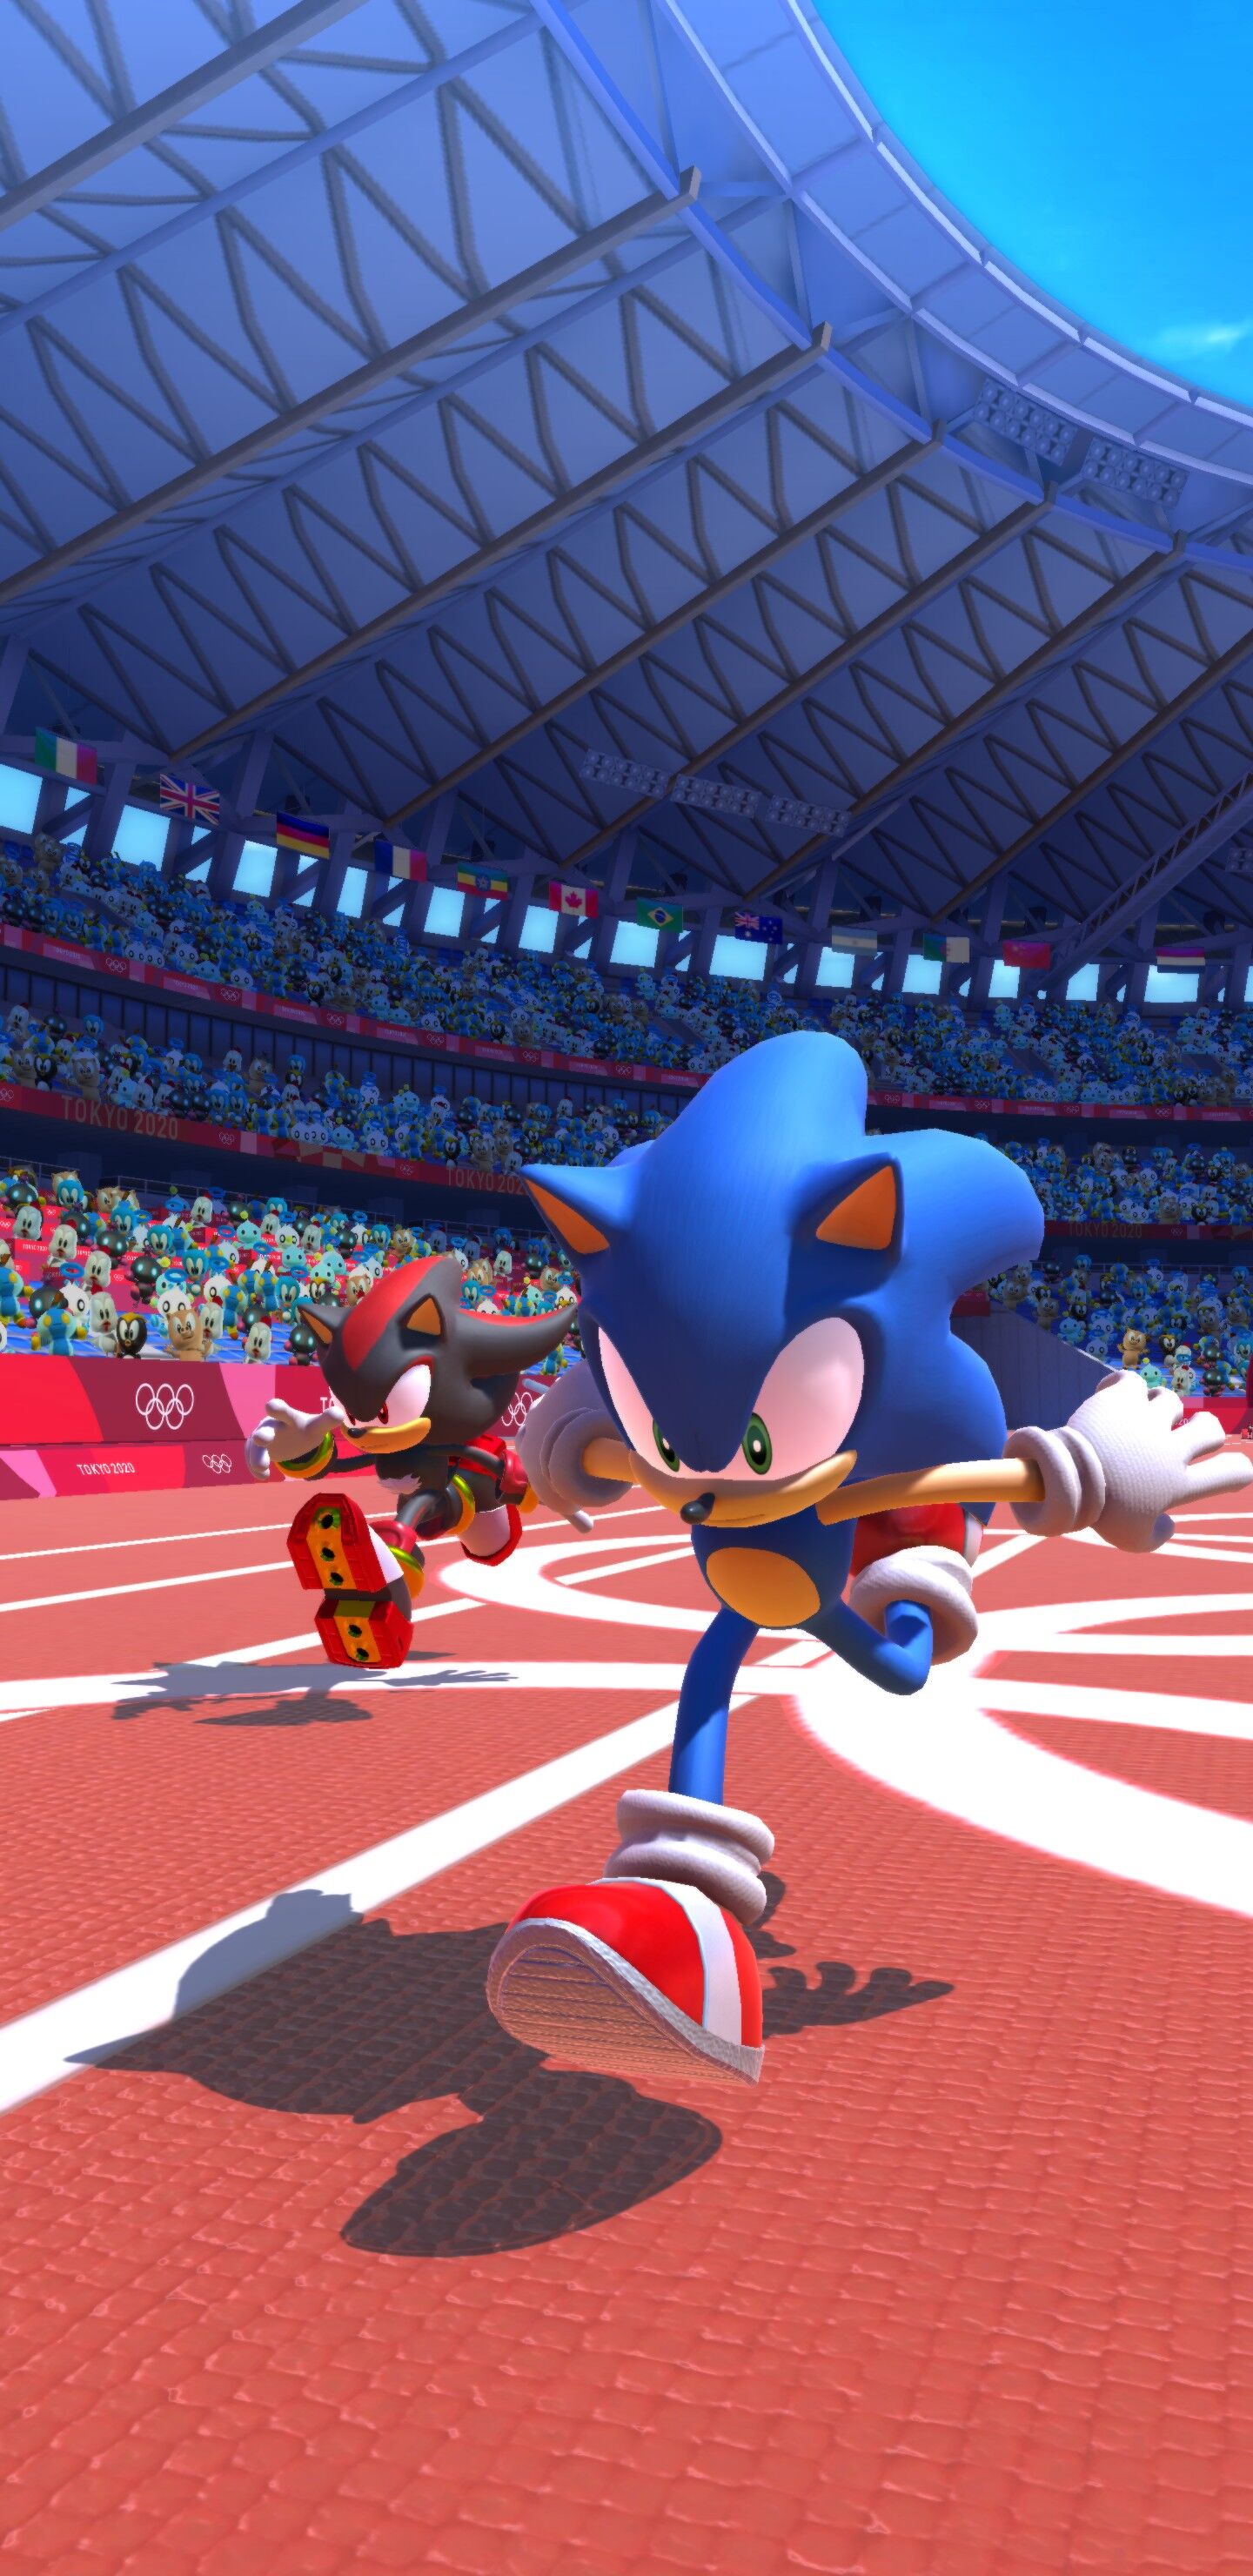 Sonic at the Olympic Games - Tokyo 2020 Reveals First Mobile Images